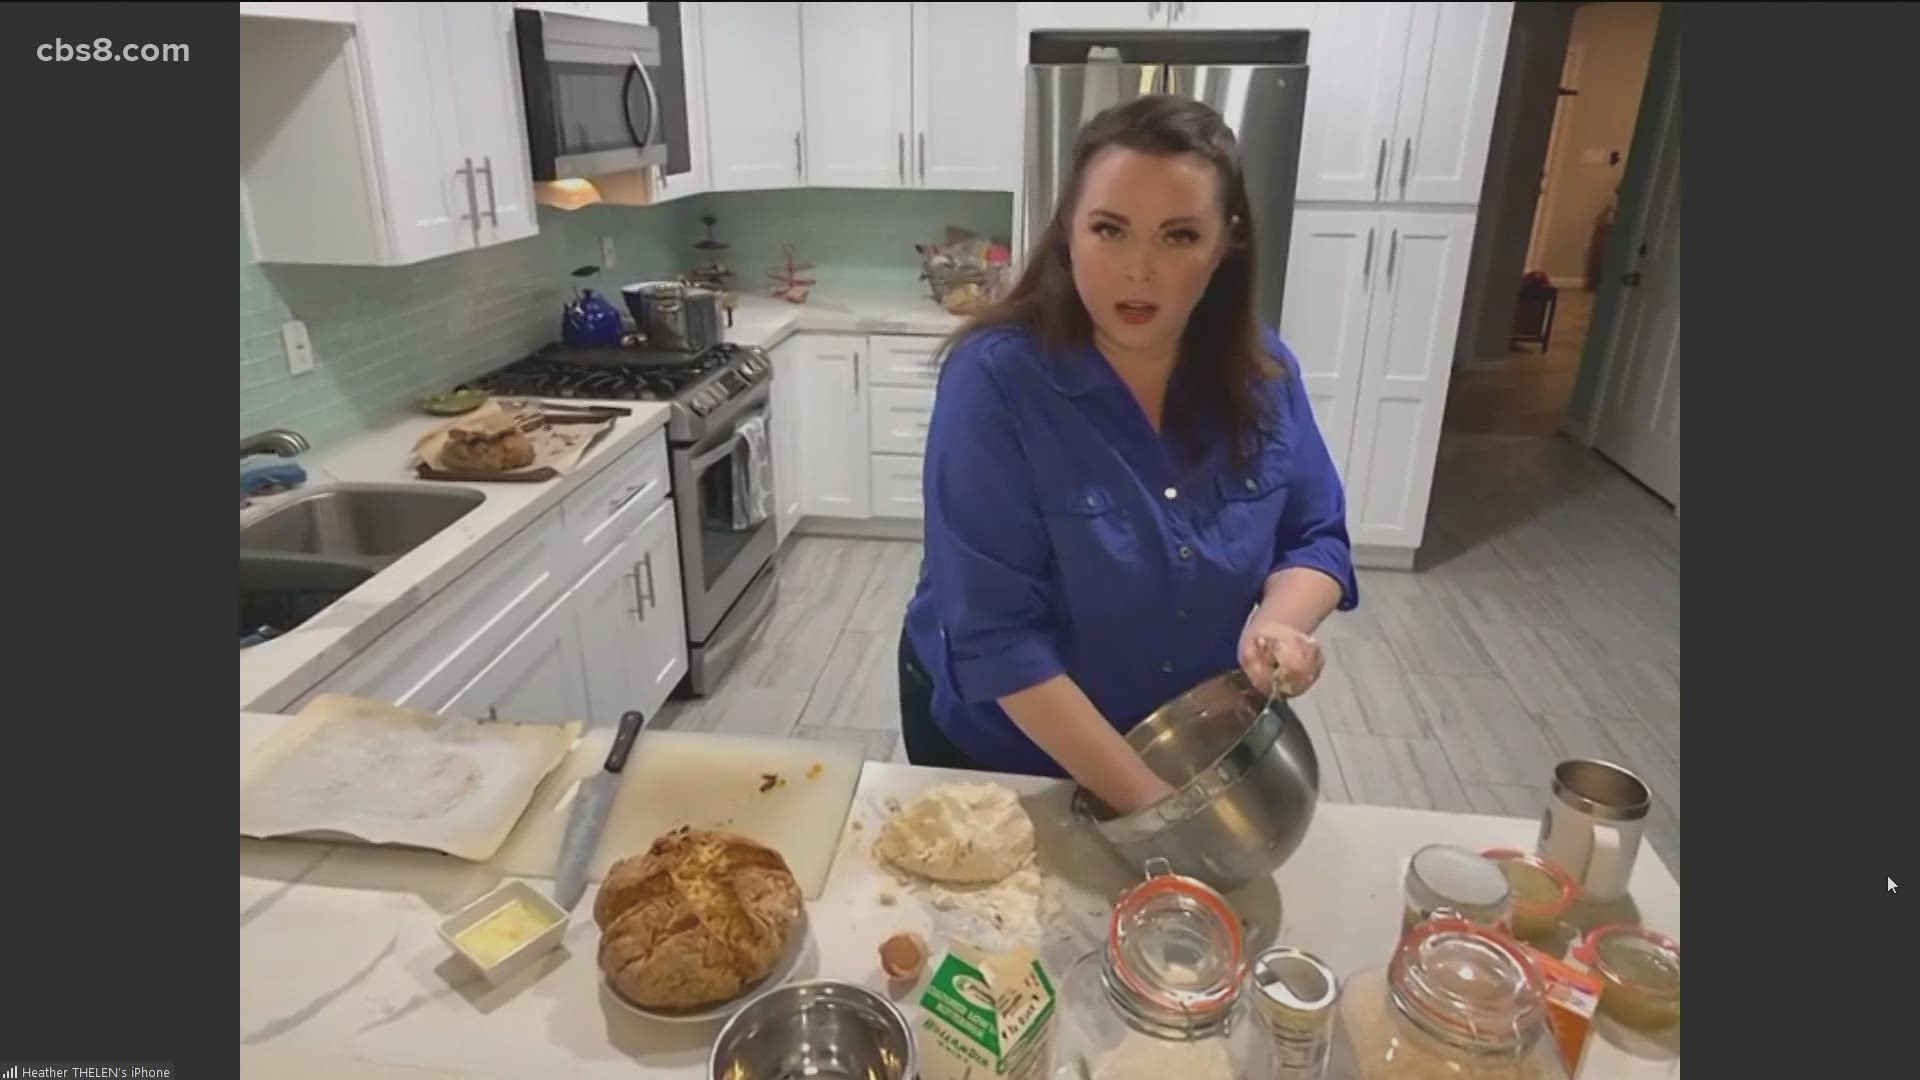 Hawthorne Country Store’s Heather Thelen joined Morning Extra Monday with a few tips from her kitchen.